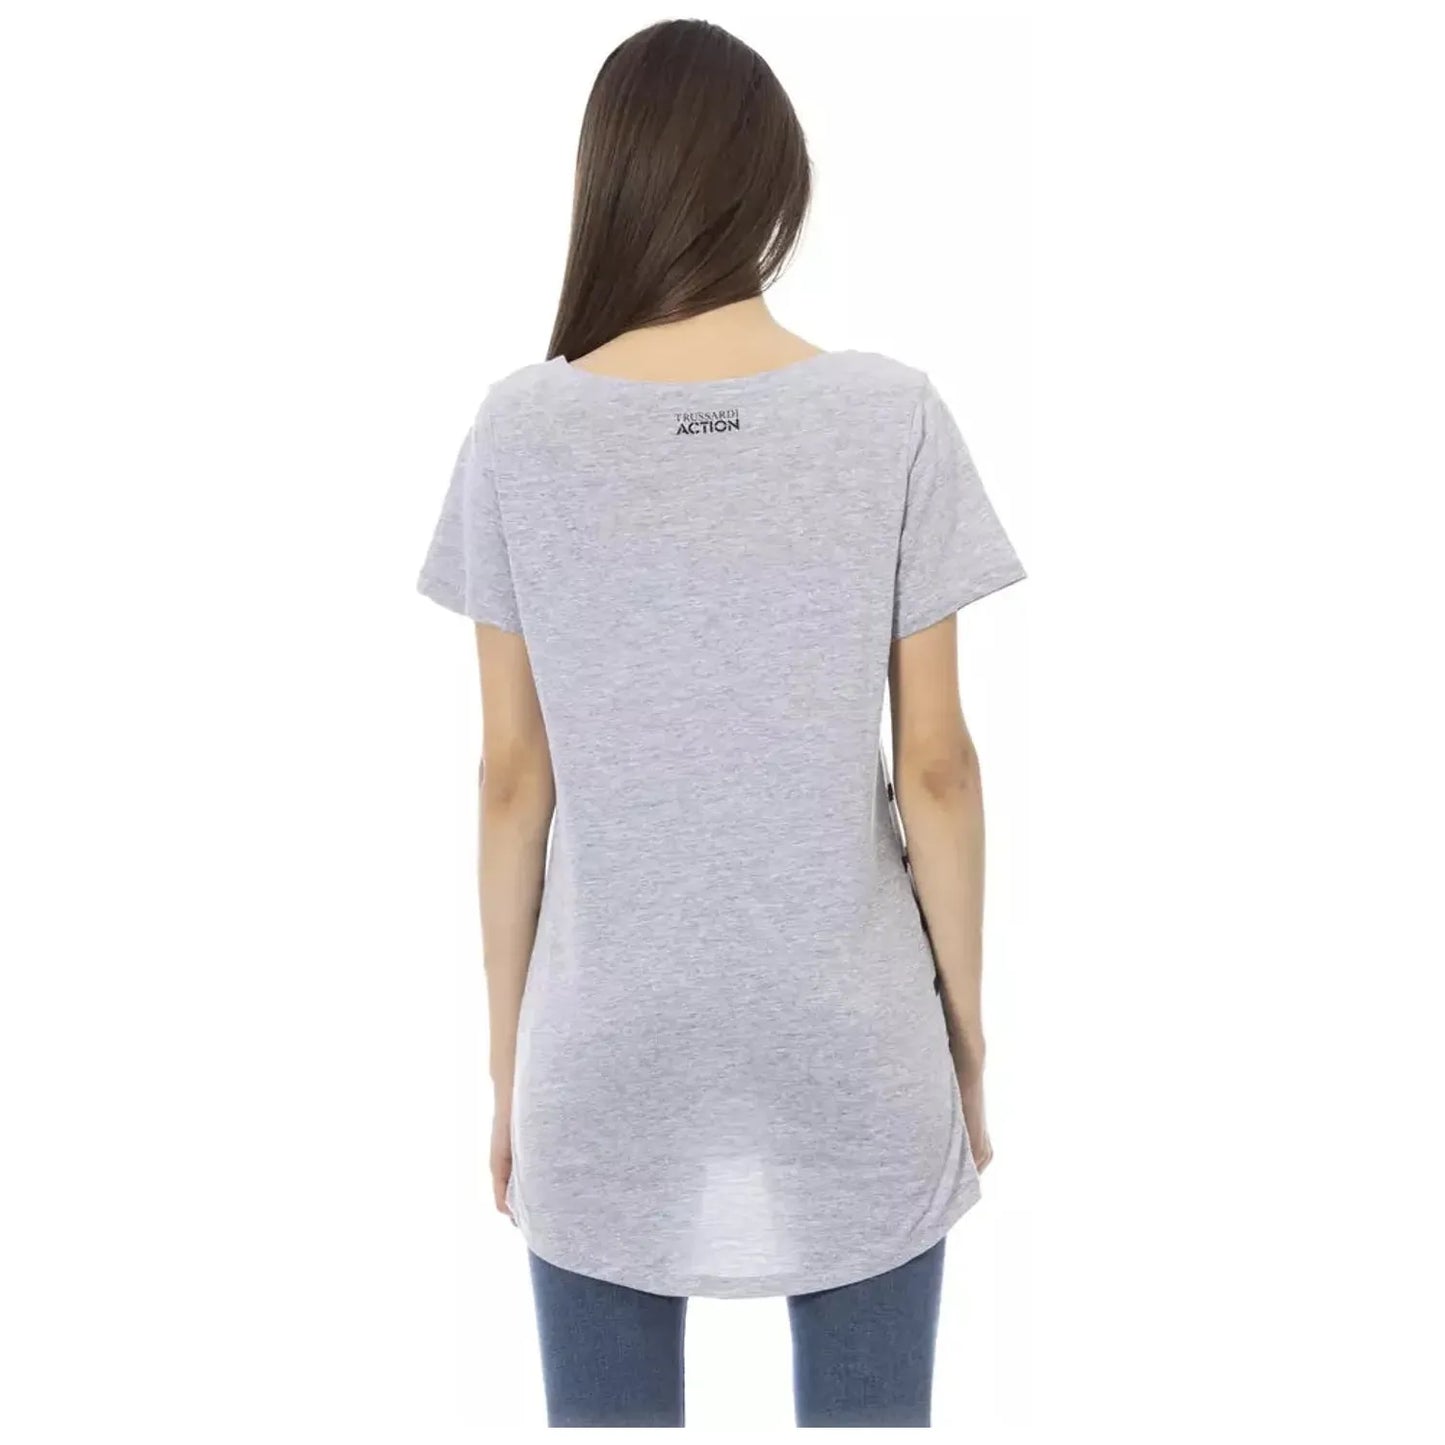 Trussardi Action Chic Gray Round Neck Tee with Unique Print gray-cotton-tops-t-shirt-20